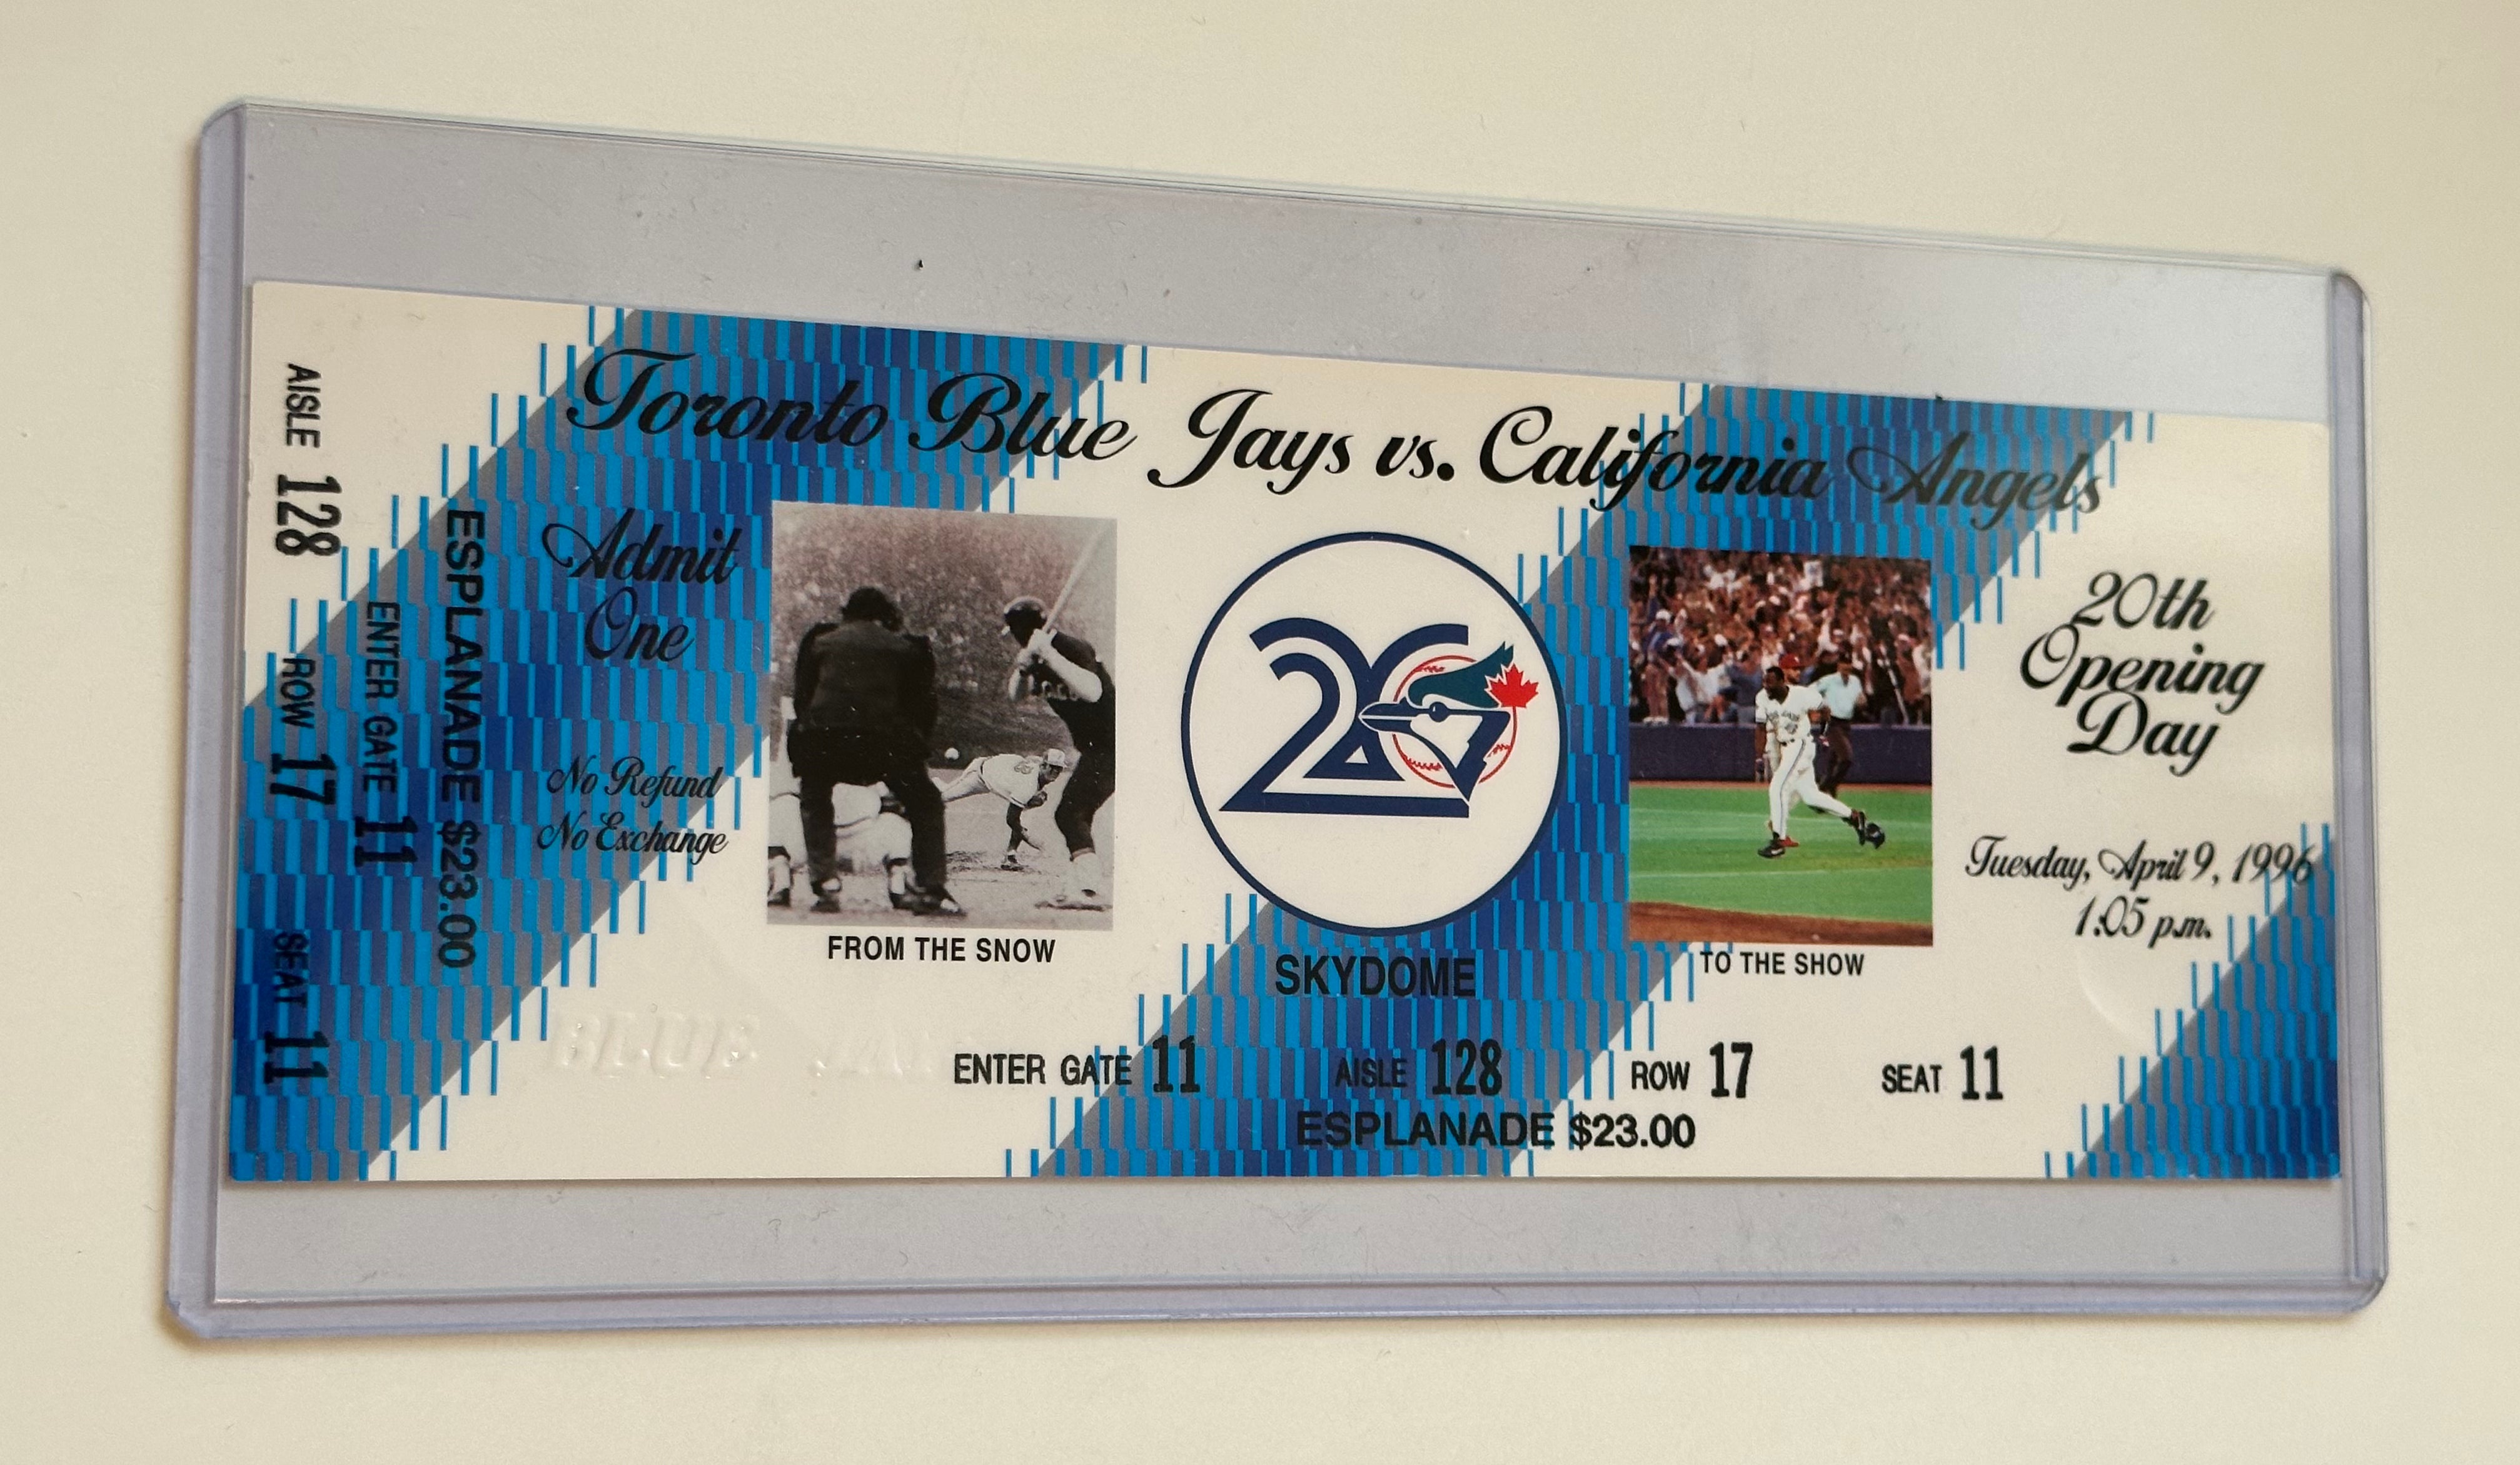 Toronto Blue Jays baseball special 30th opening day ticket 1996